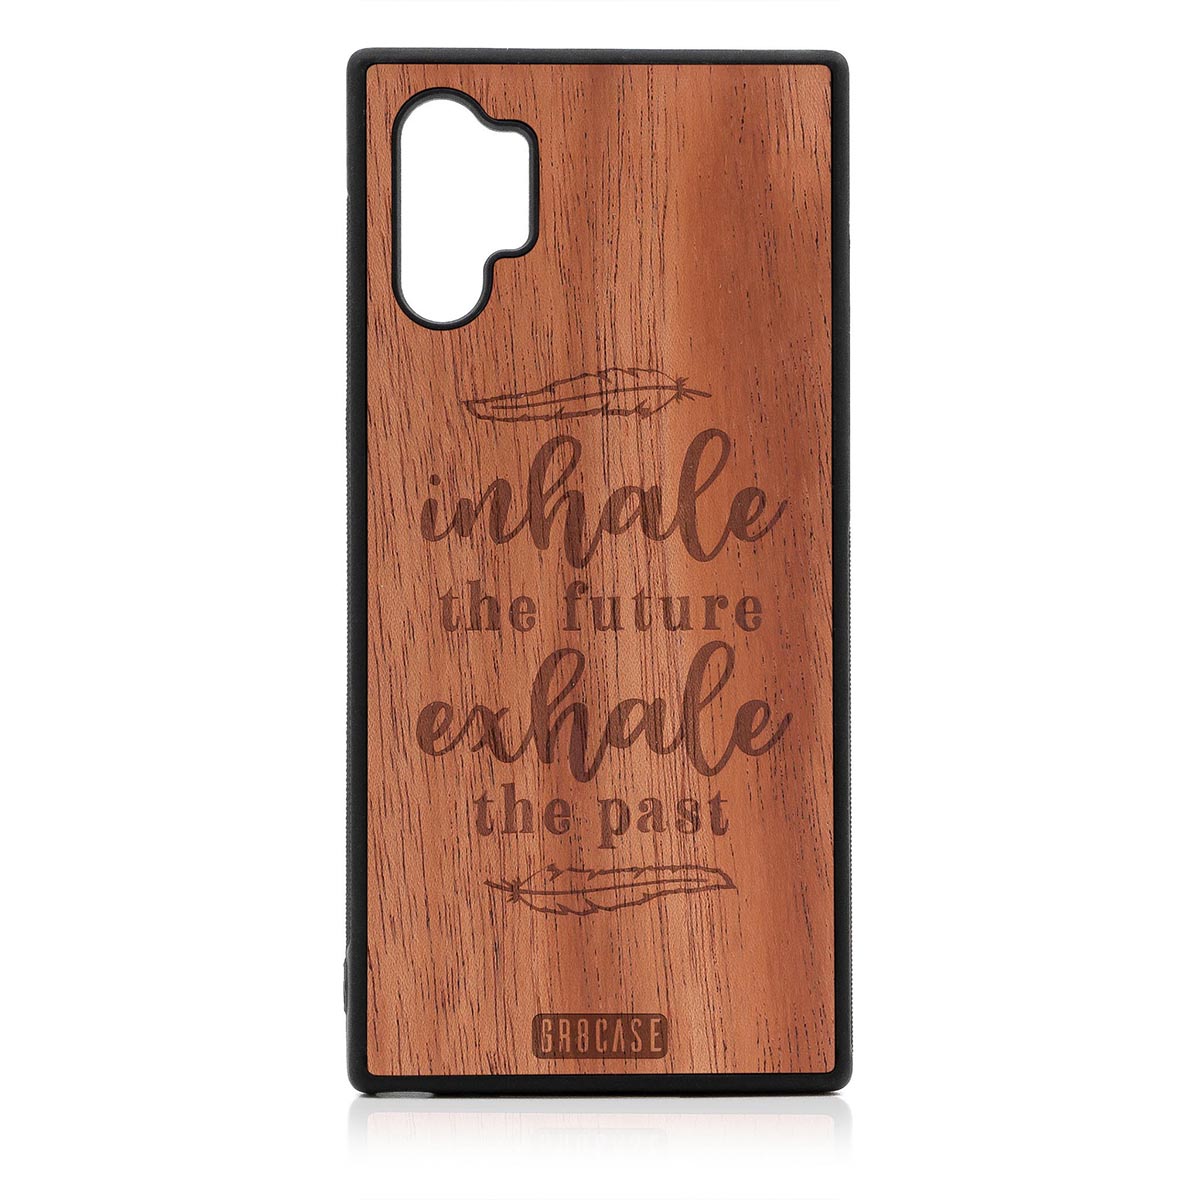 Inhale The Future Exhale The Past Design Wood Case Samsung Galaxy Note 10 Plus by GR8CASE